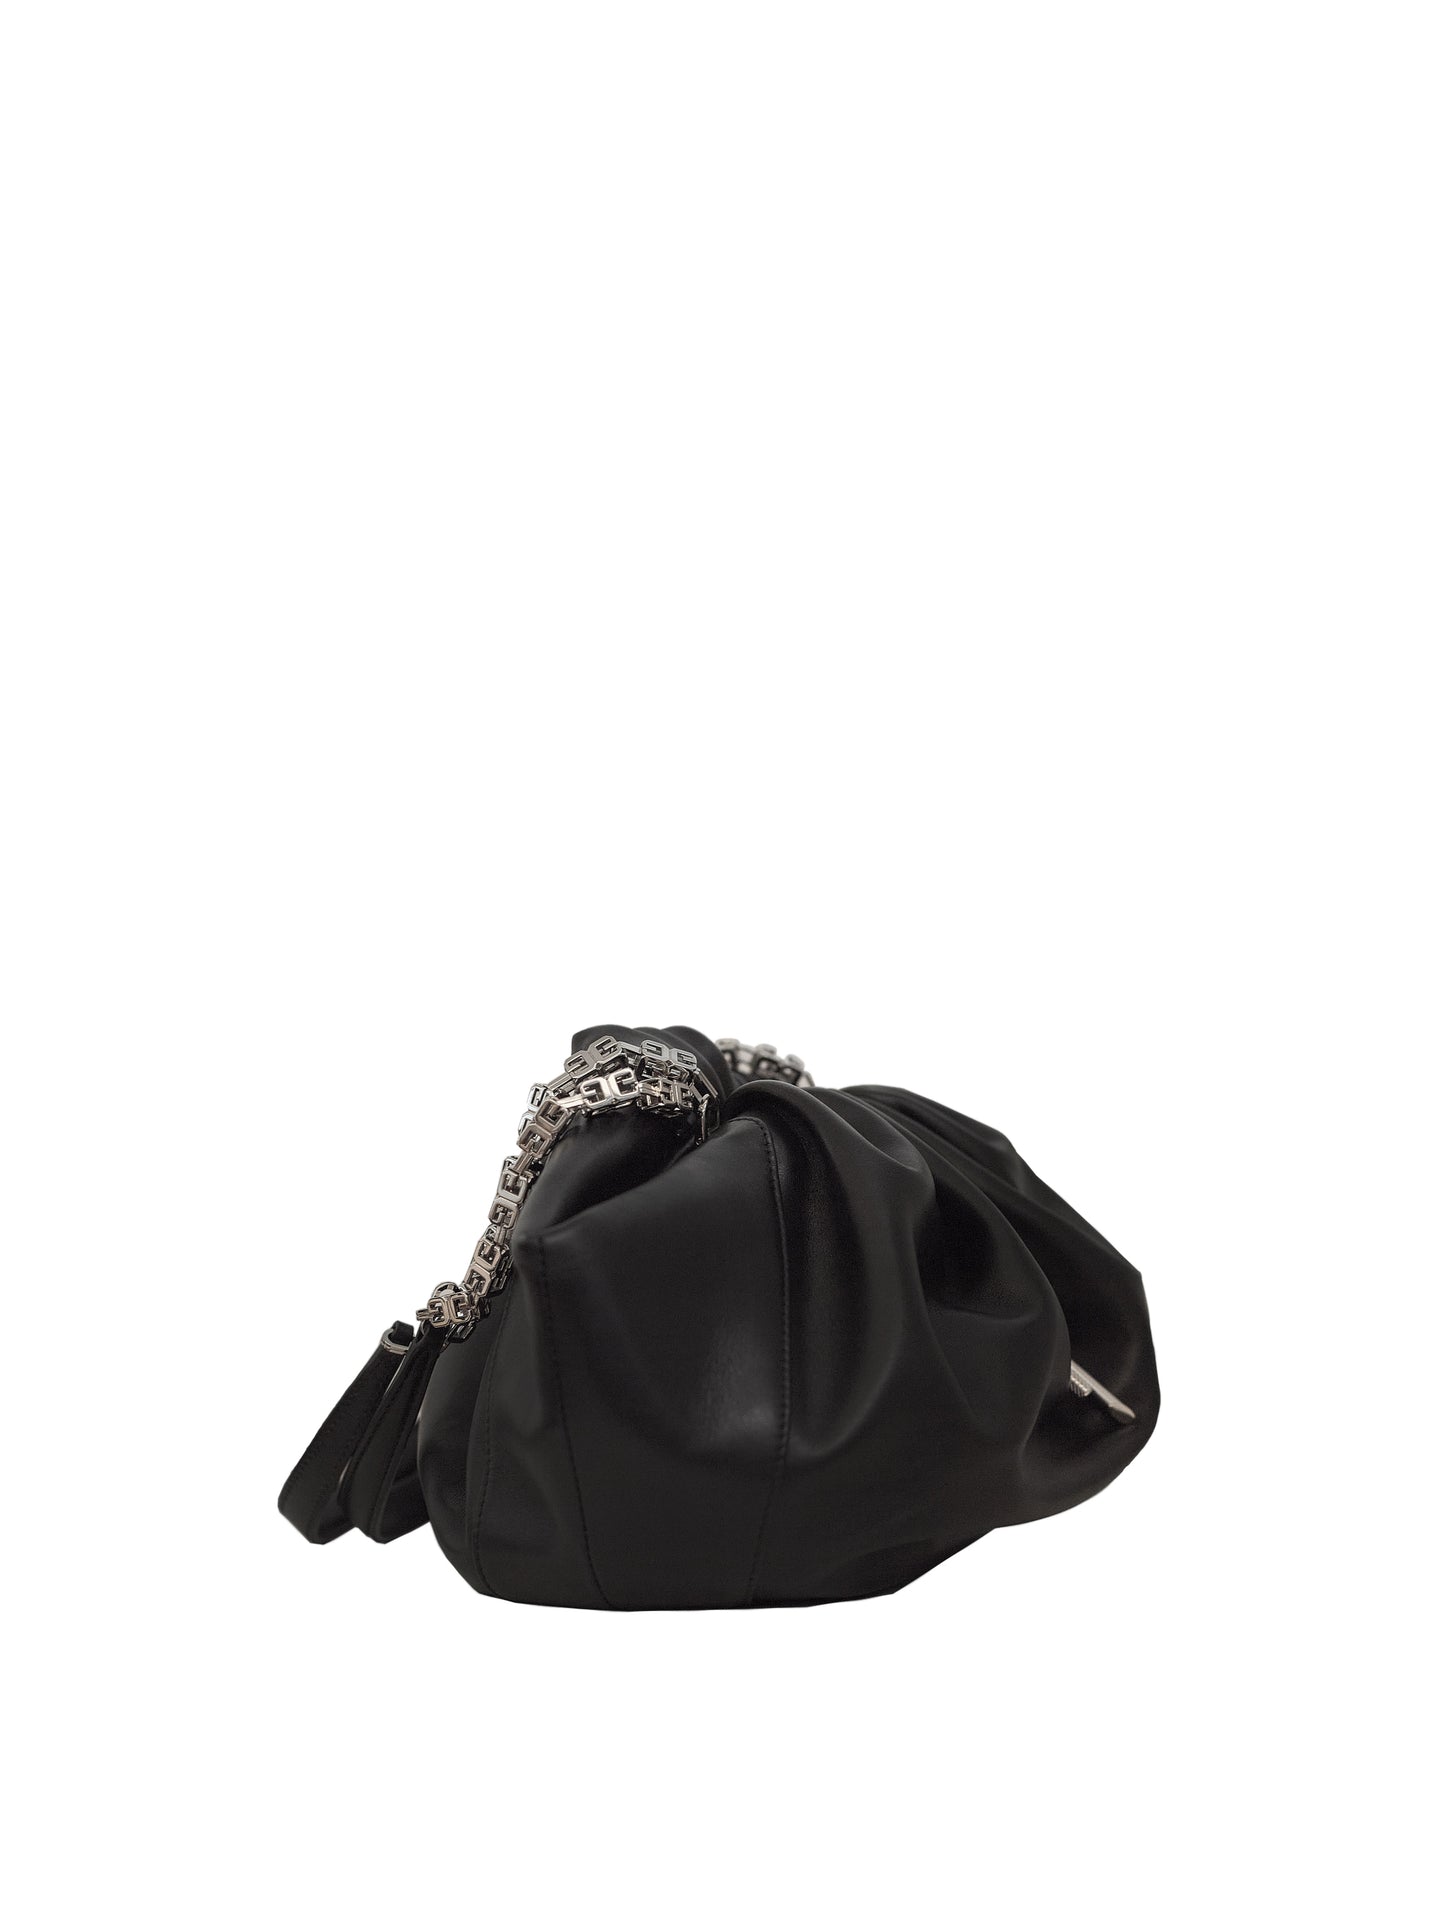 Givenchy Small Kenny bag in black - La Boutique Dresden